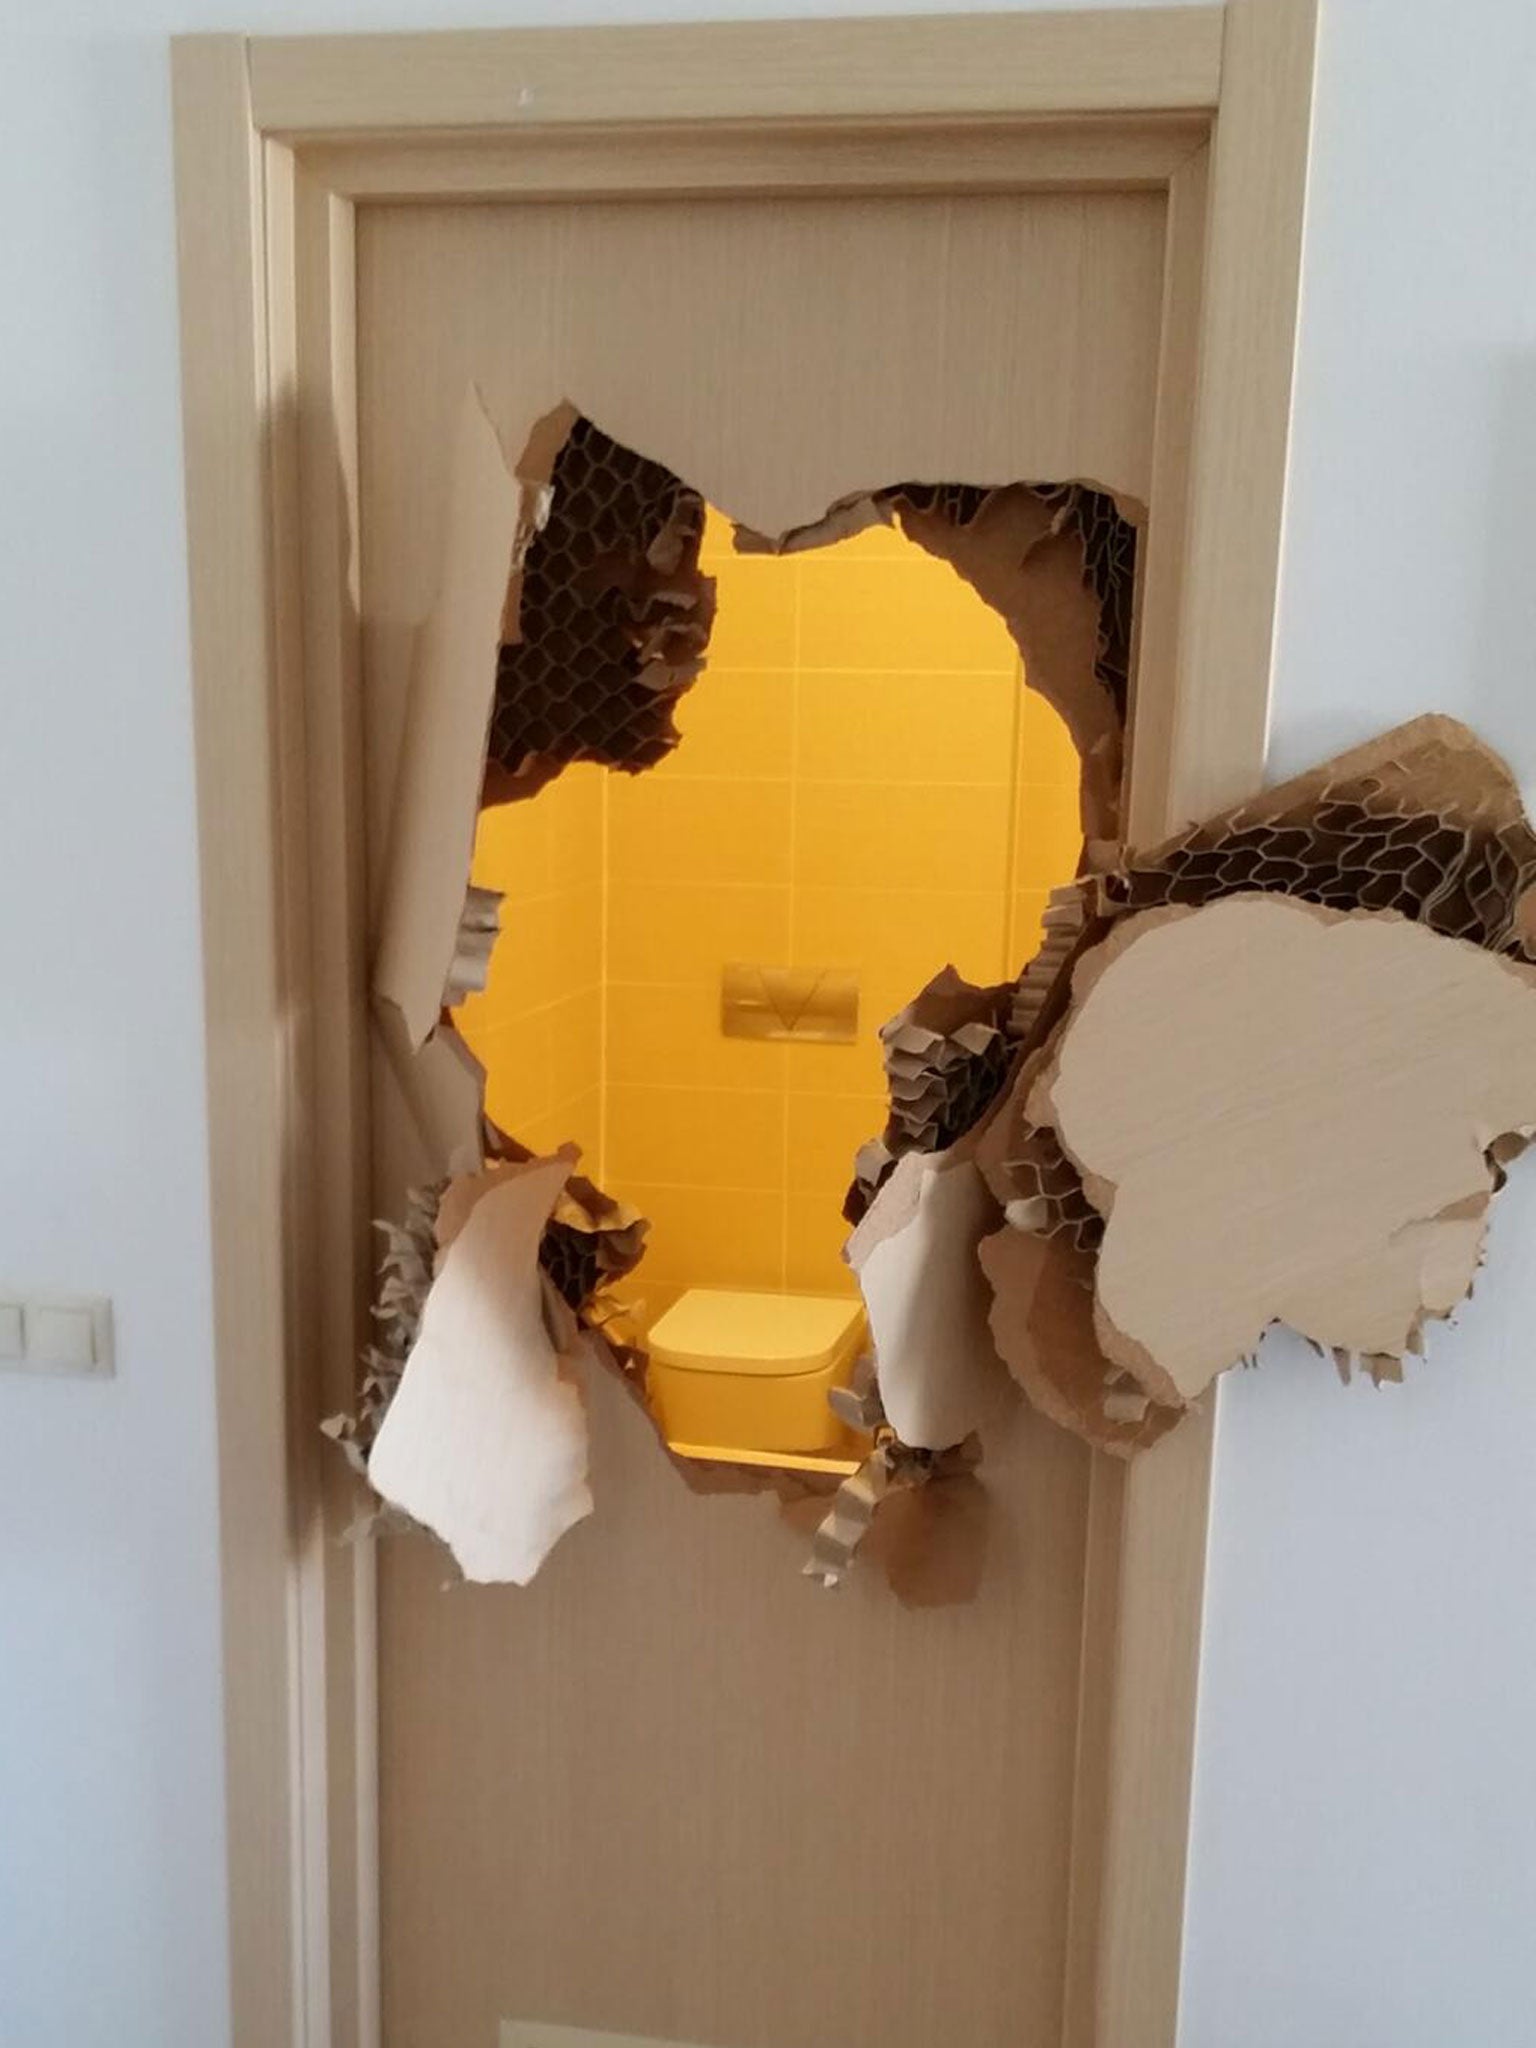 The door after Johnny Quinn broke free from it